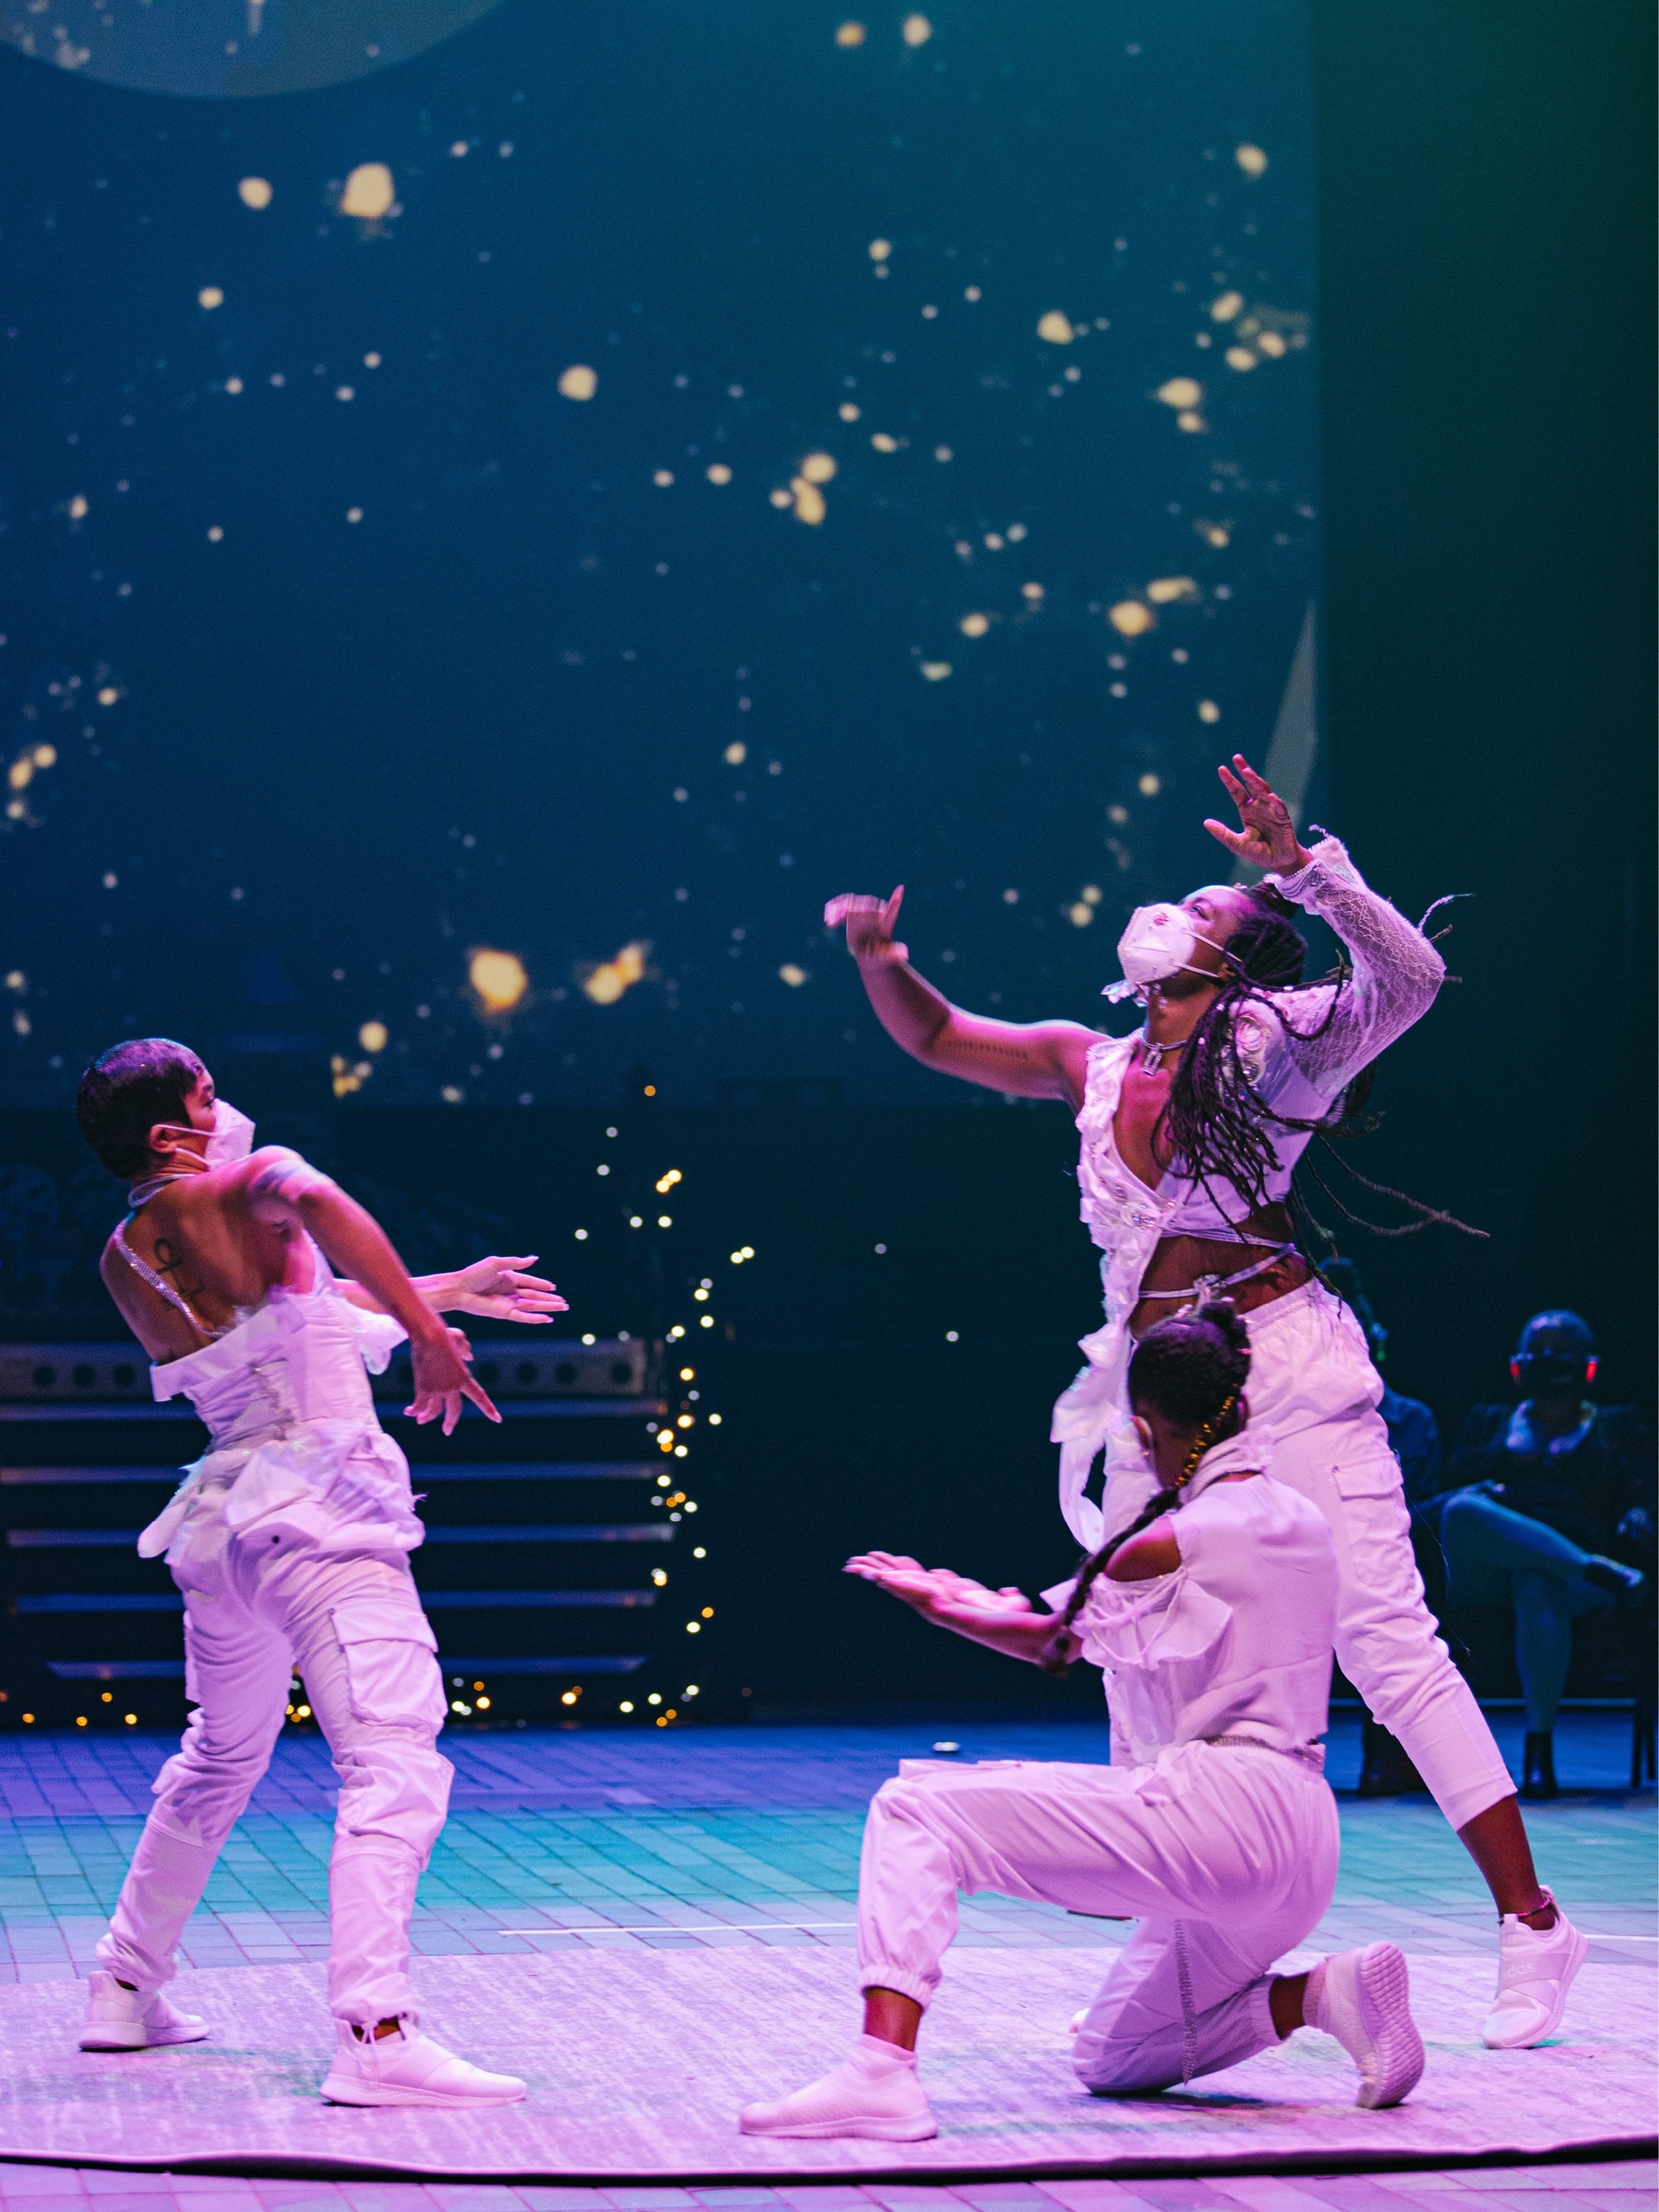 Three performers dressed all in white move on stage with hands out and one of them kneeling. The background scene is lit with small lights evoking a cosmic scene.